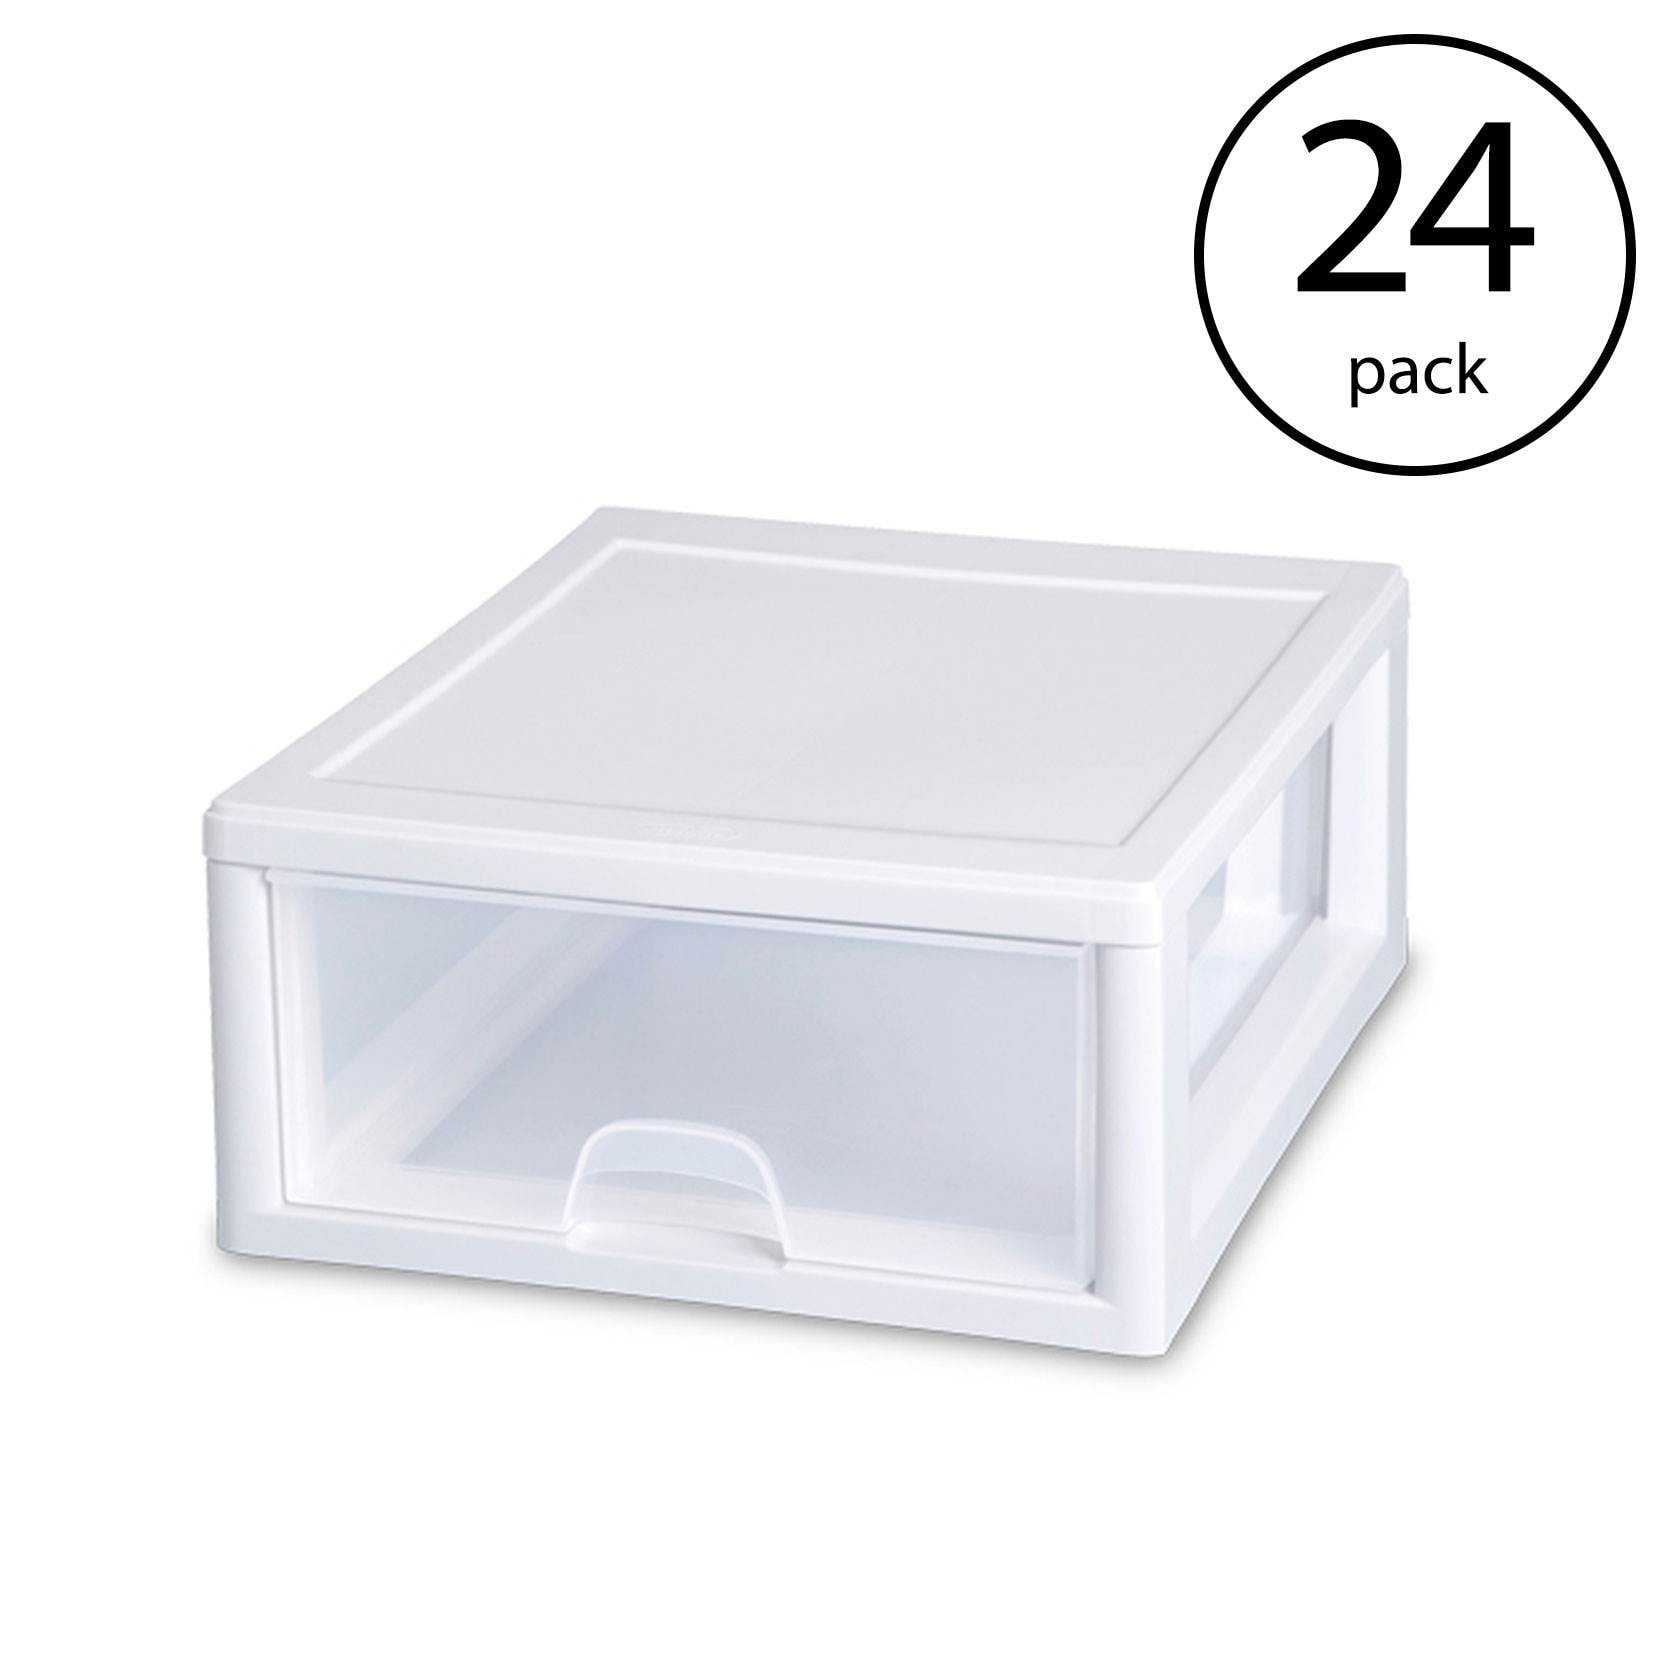 https://ak1.ostkcdn.com/images/products/is/images/direct/99098df796cbd9cfb1577e026523a86e7fc3c89a/Sterilite-16-Qt-Single-Box-Modular-Stacking-Storage-Drawer-Container-%2824-Pack%29.jpg